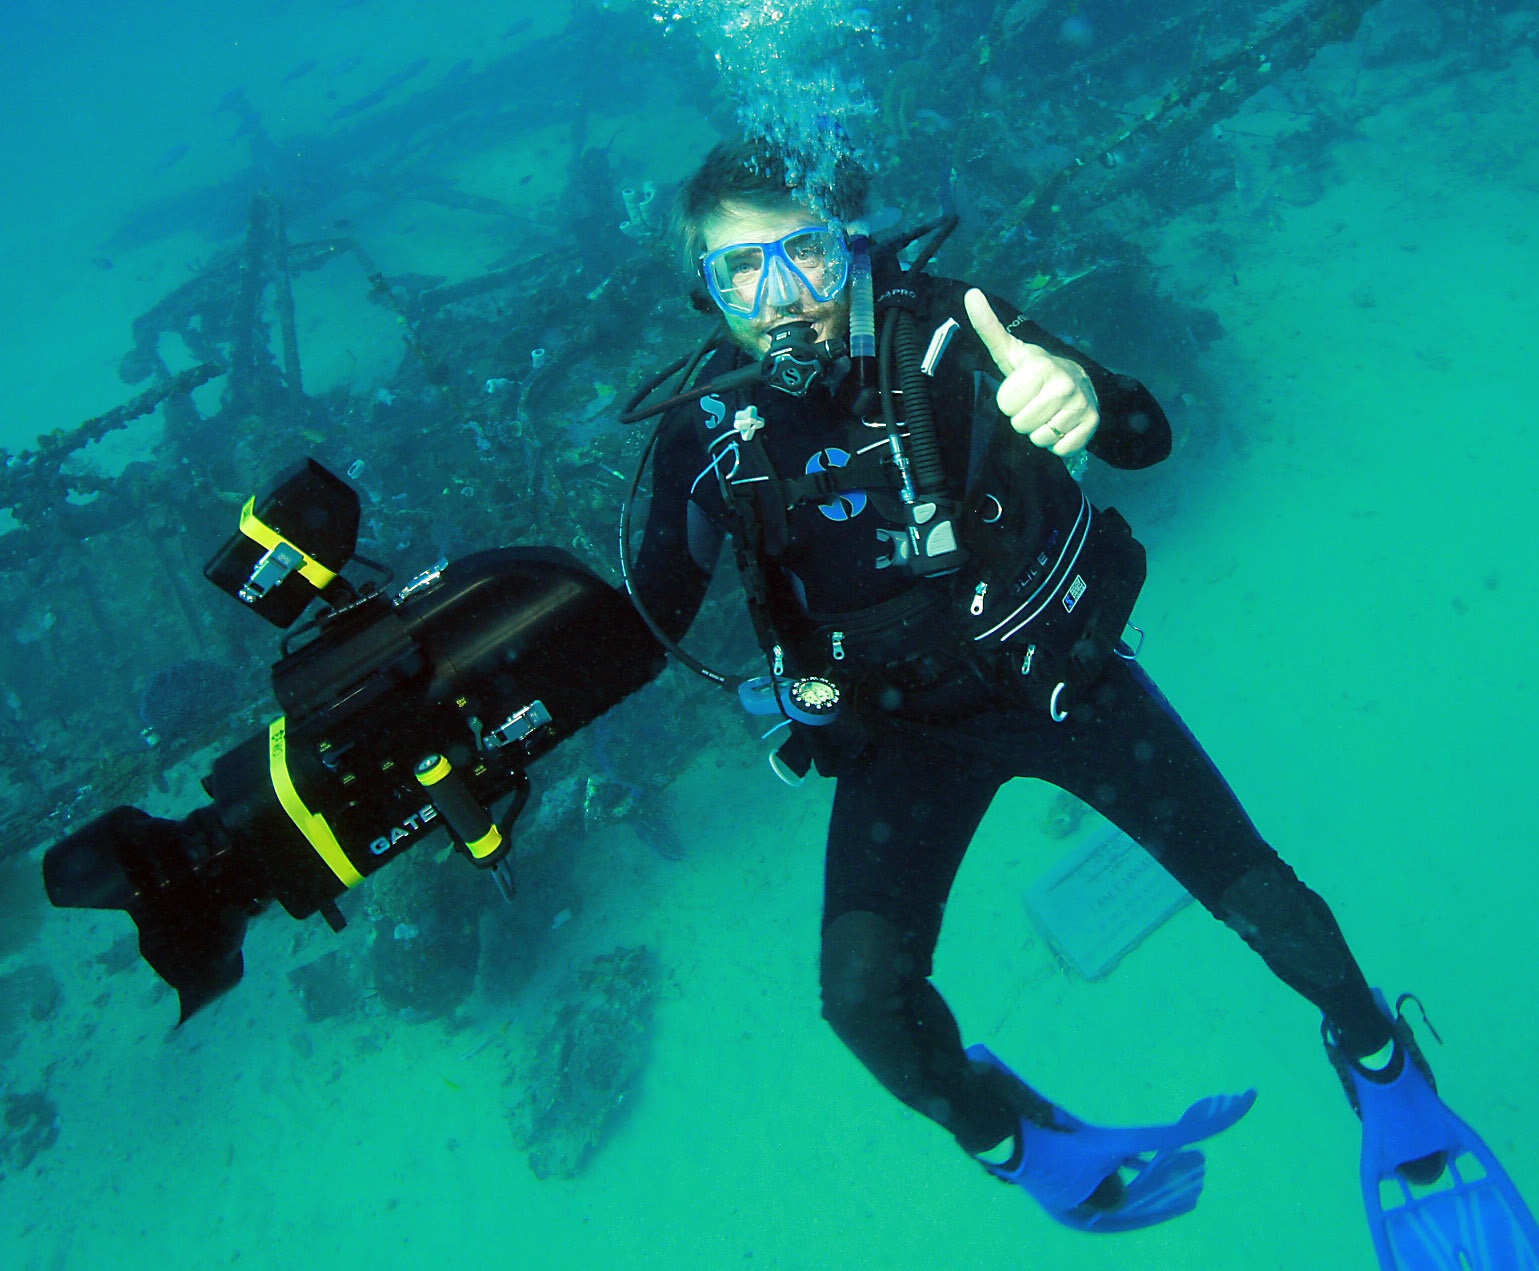 On location 100' underwater in Papua New Guinea documenting the search for Carnuba